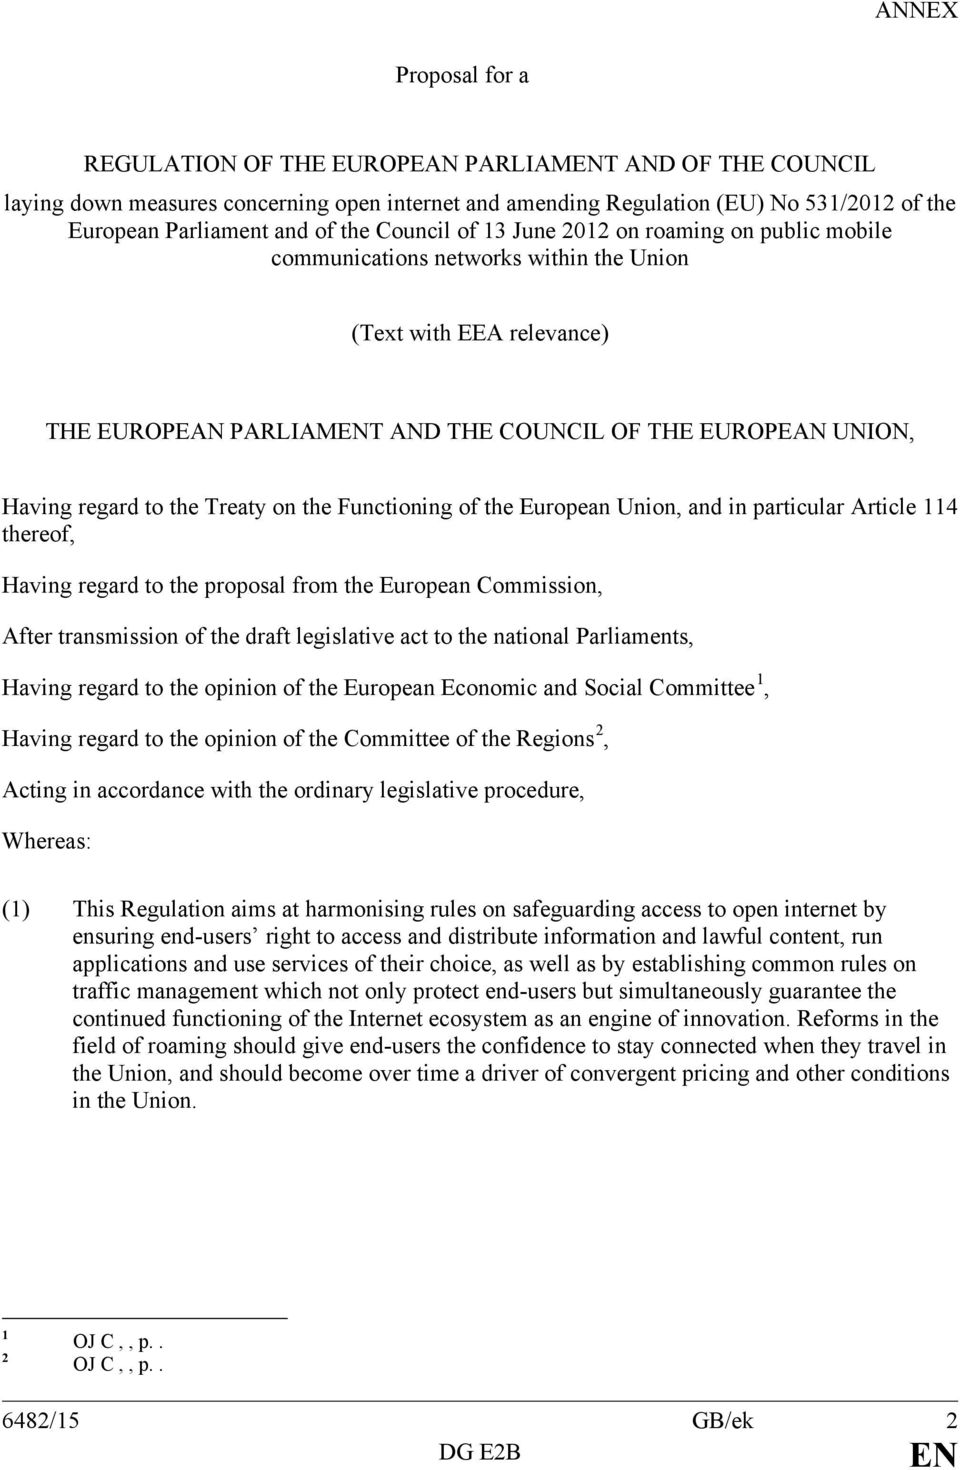 to the Treaty on the Functioning of the European Union, and in particular Article 114 thereof, Having regard to the proposal from the European Commission, After transmission of the draft legislative